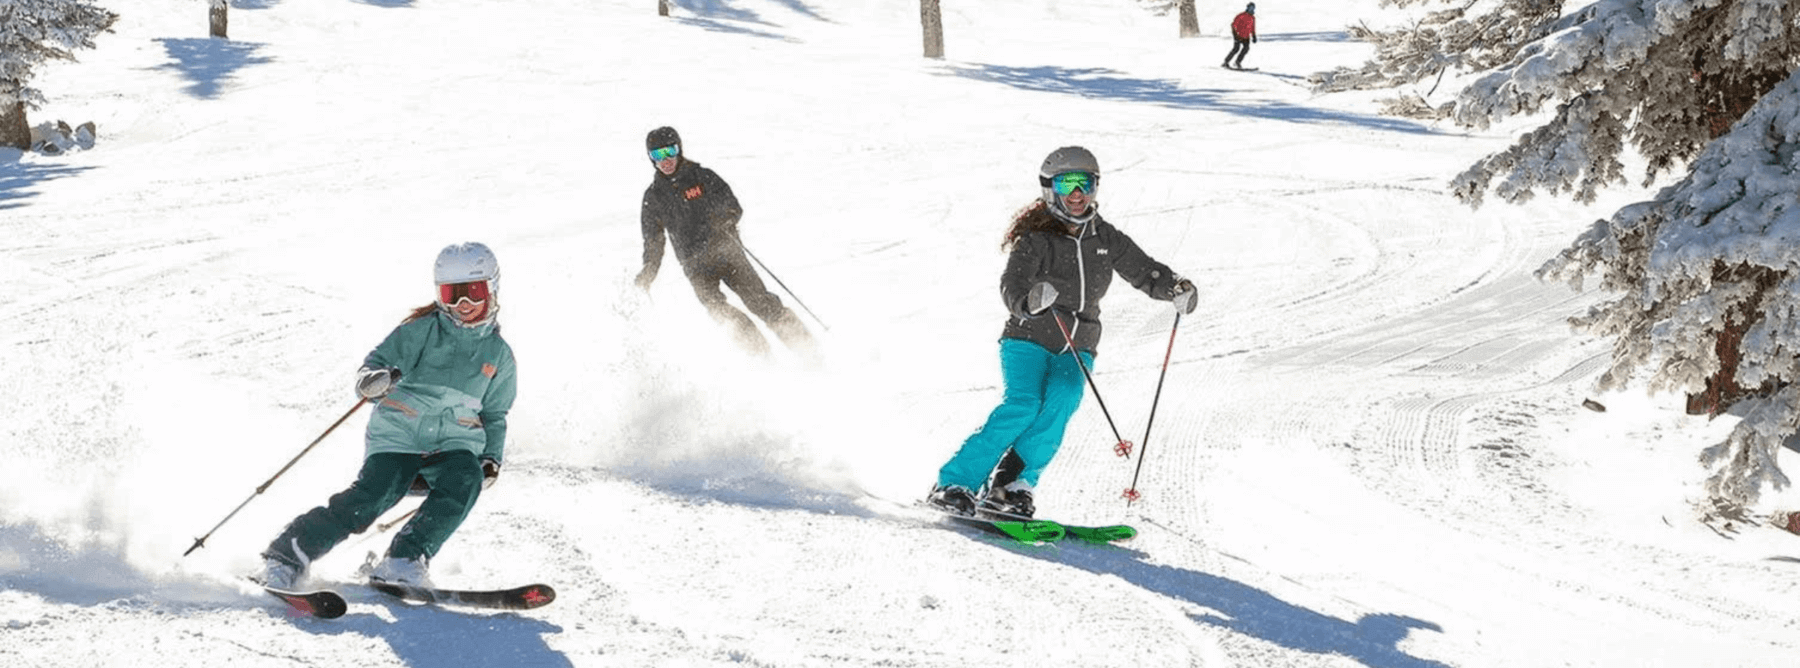 Best Ski Resorts in Colorado for Families